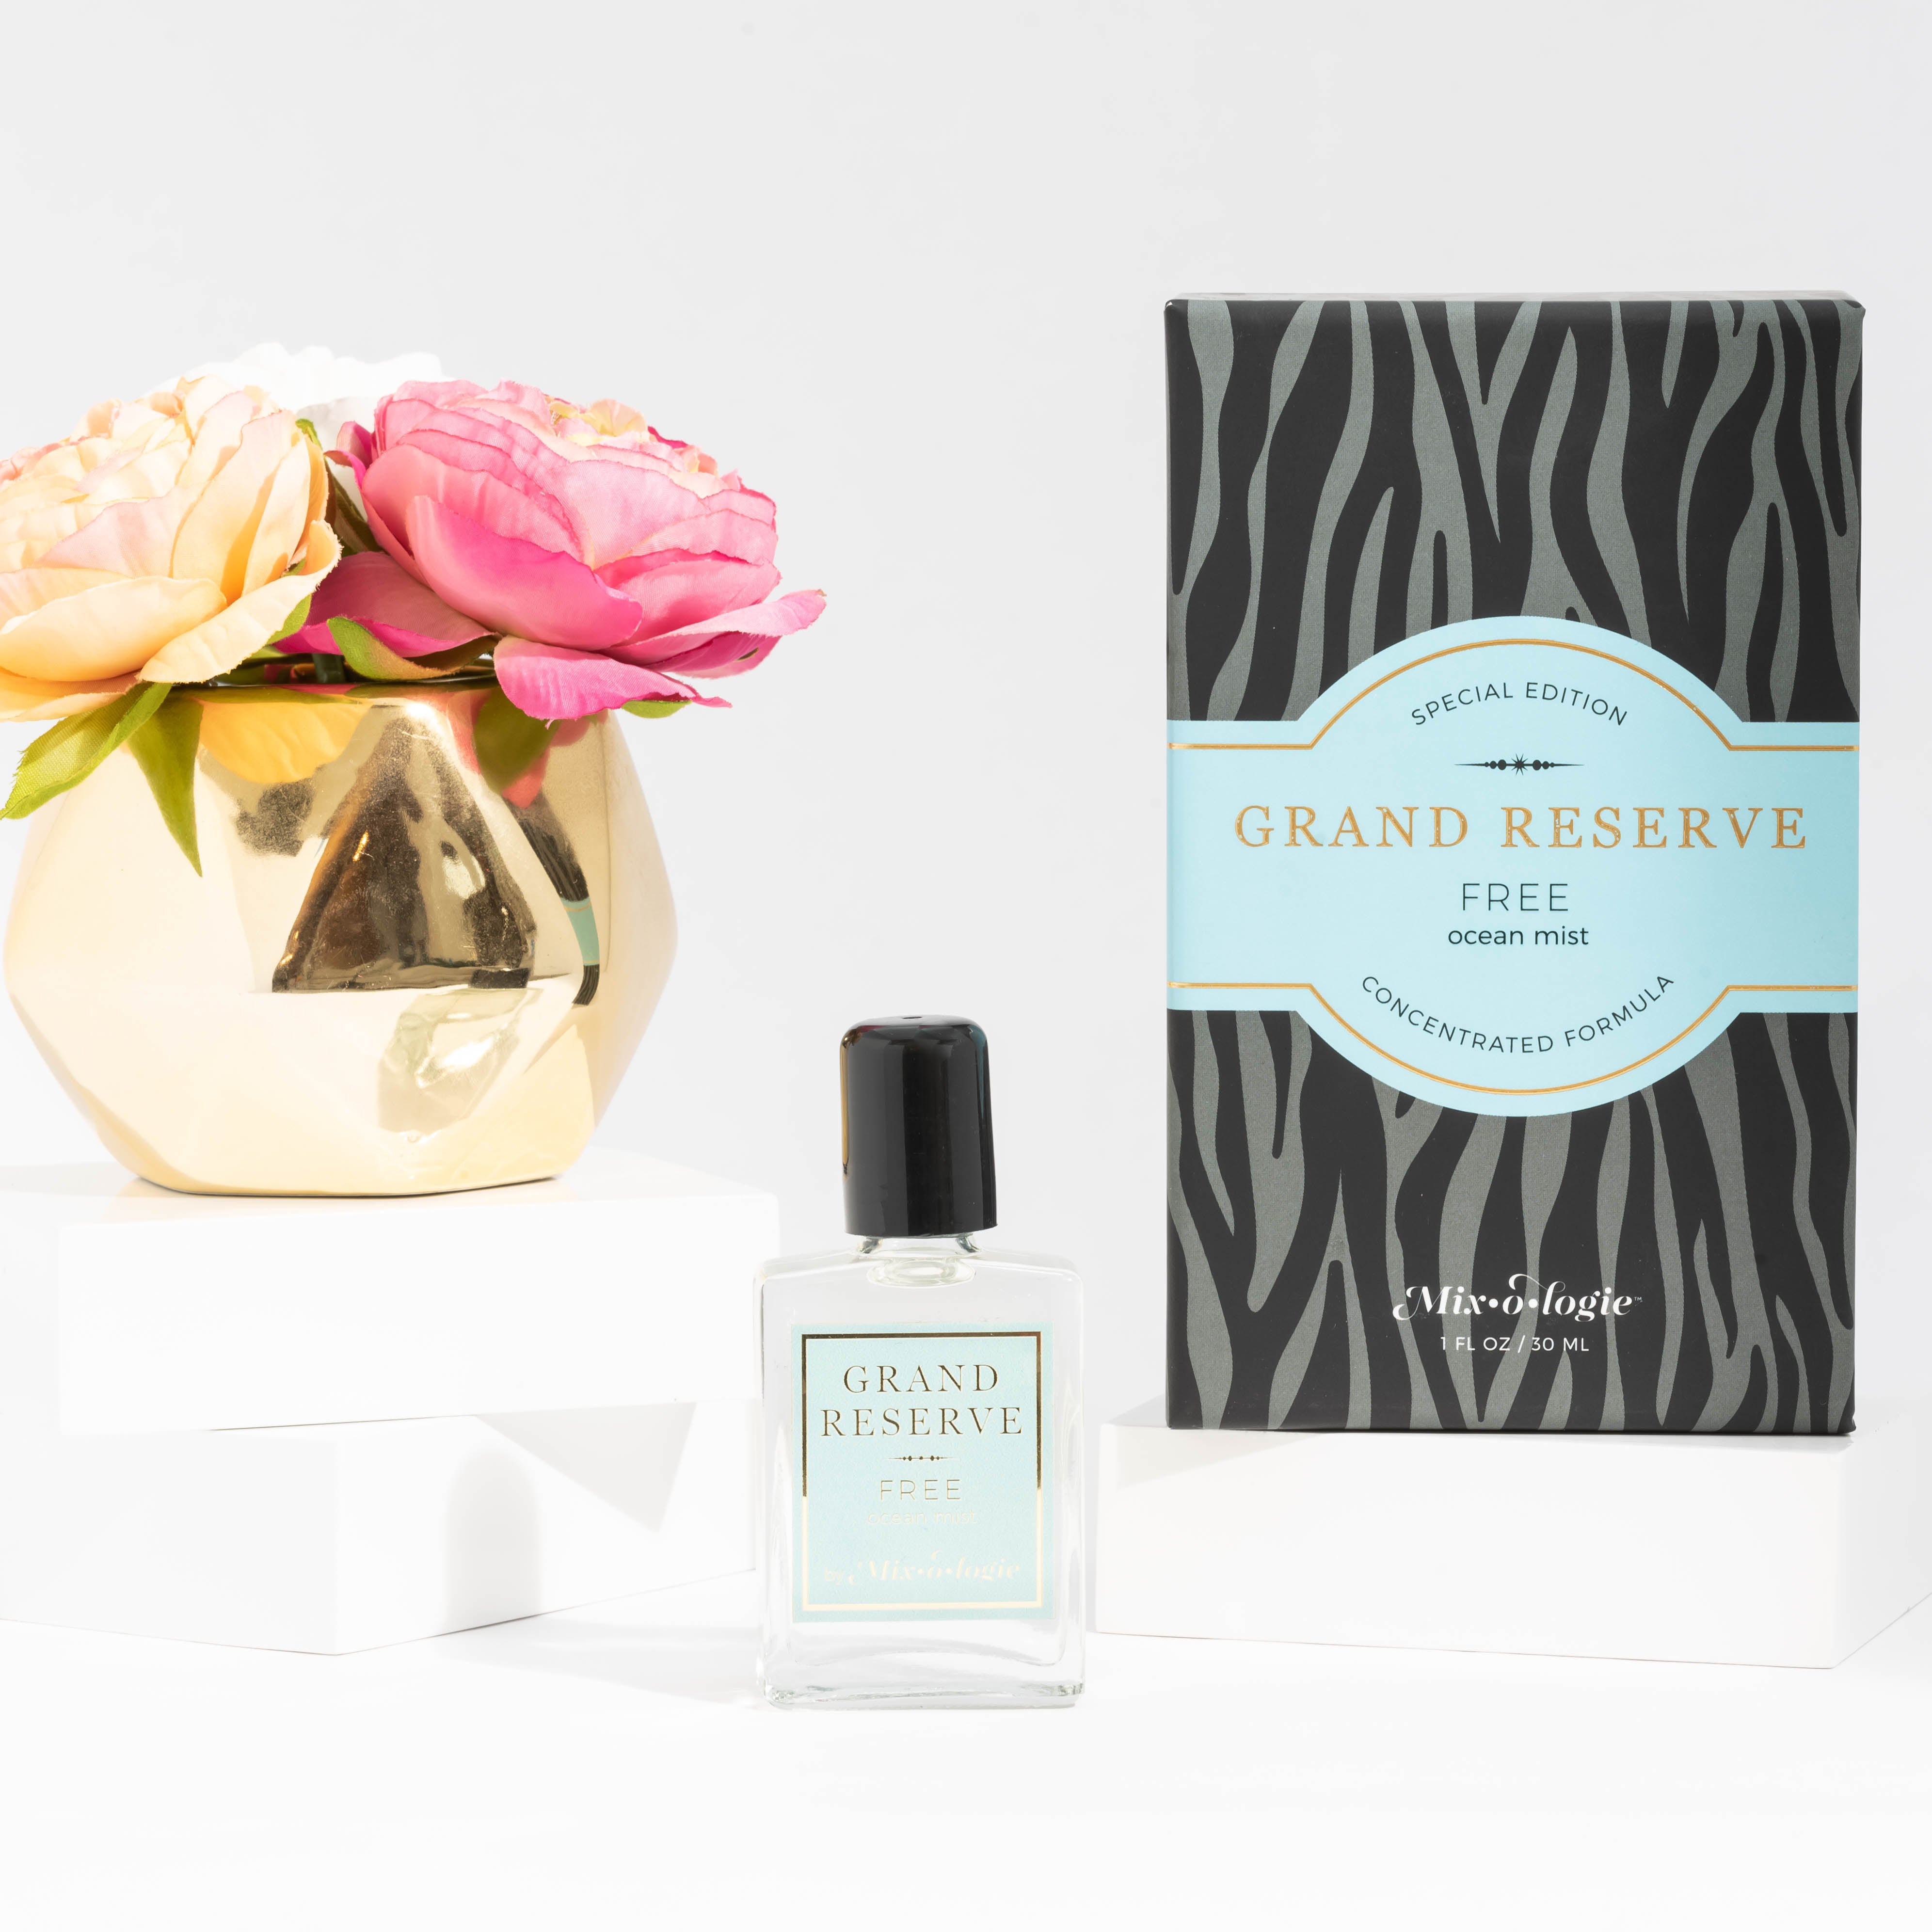 Free (Ocean Mist) Special Edition Grand Reserve concentrated formula in clear glass rectangle perfume bottle that has 1 fl oz or 30 mL of clear liquid with black cap, label, and spray nozzle. Black zebra pattern rectangle box with pale blue letting. Grand Reserve and box pictured with white background pink flower and gold table décor.